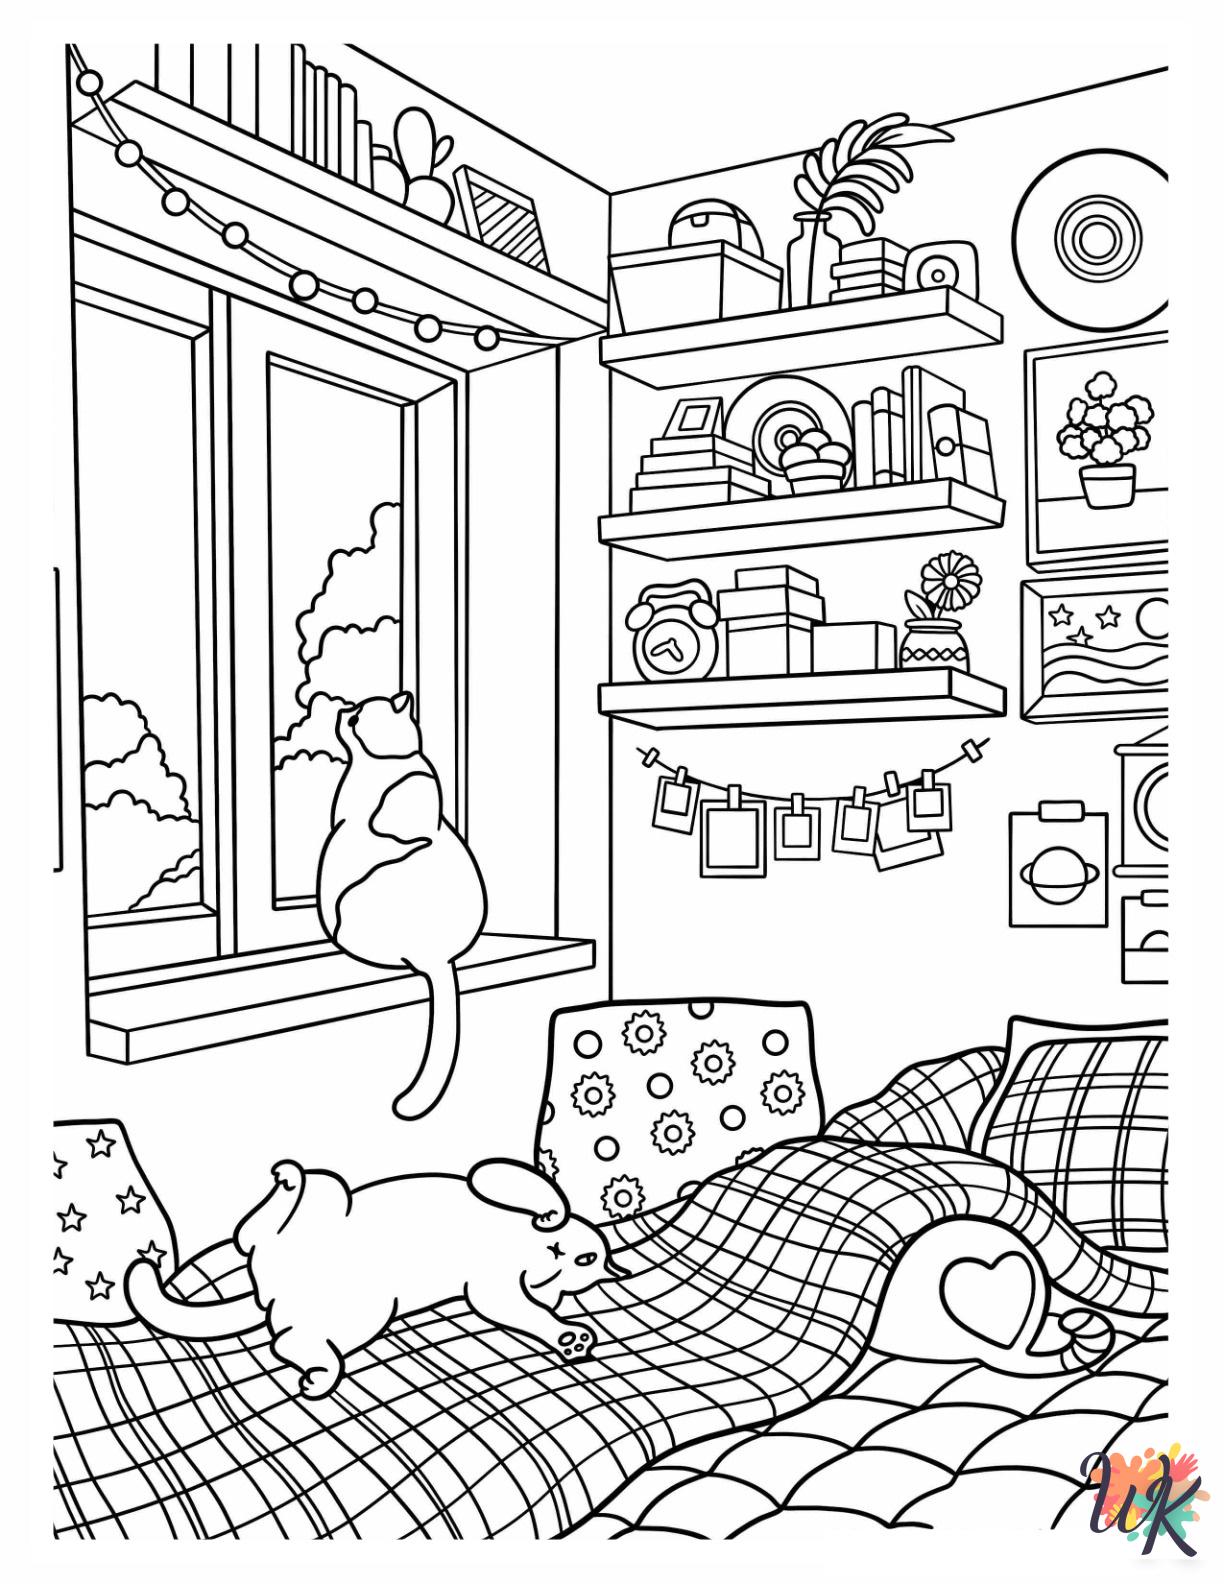 Aesthetic ornament coloring pages